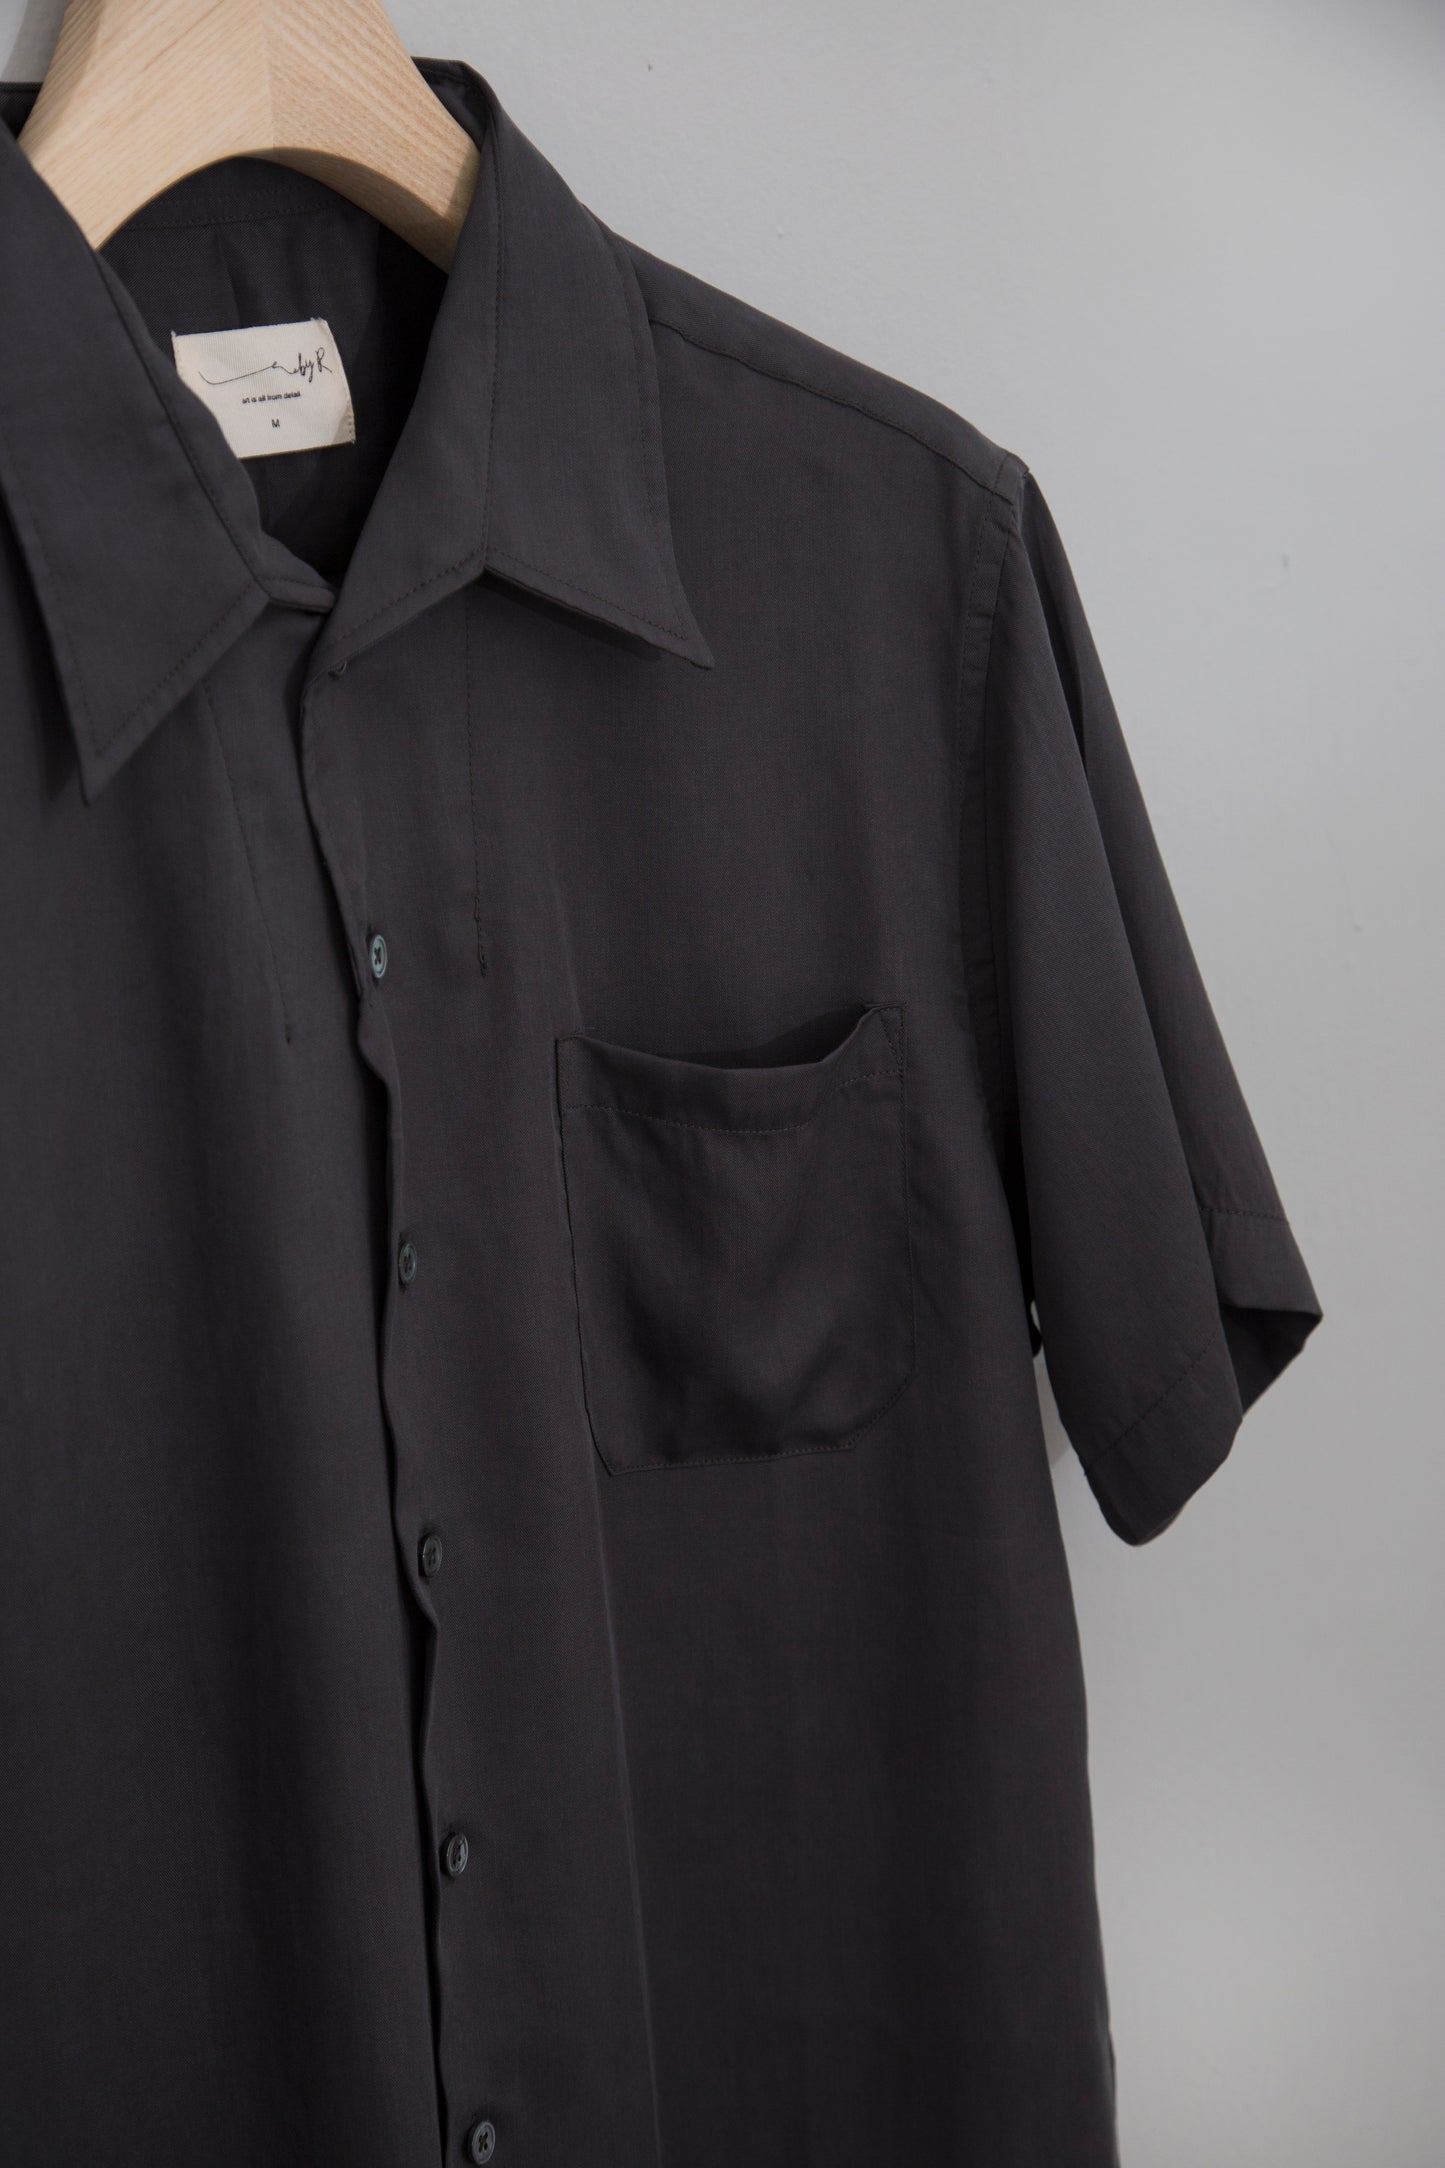 By R SS20 Light Voile Shirt